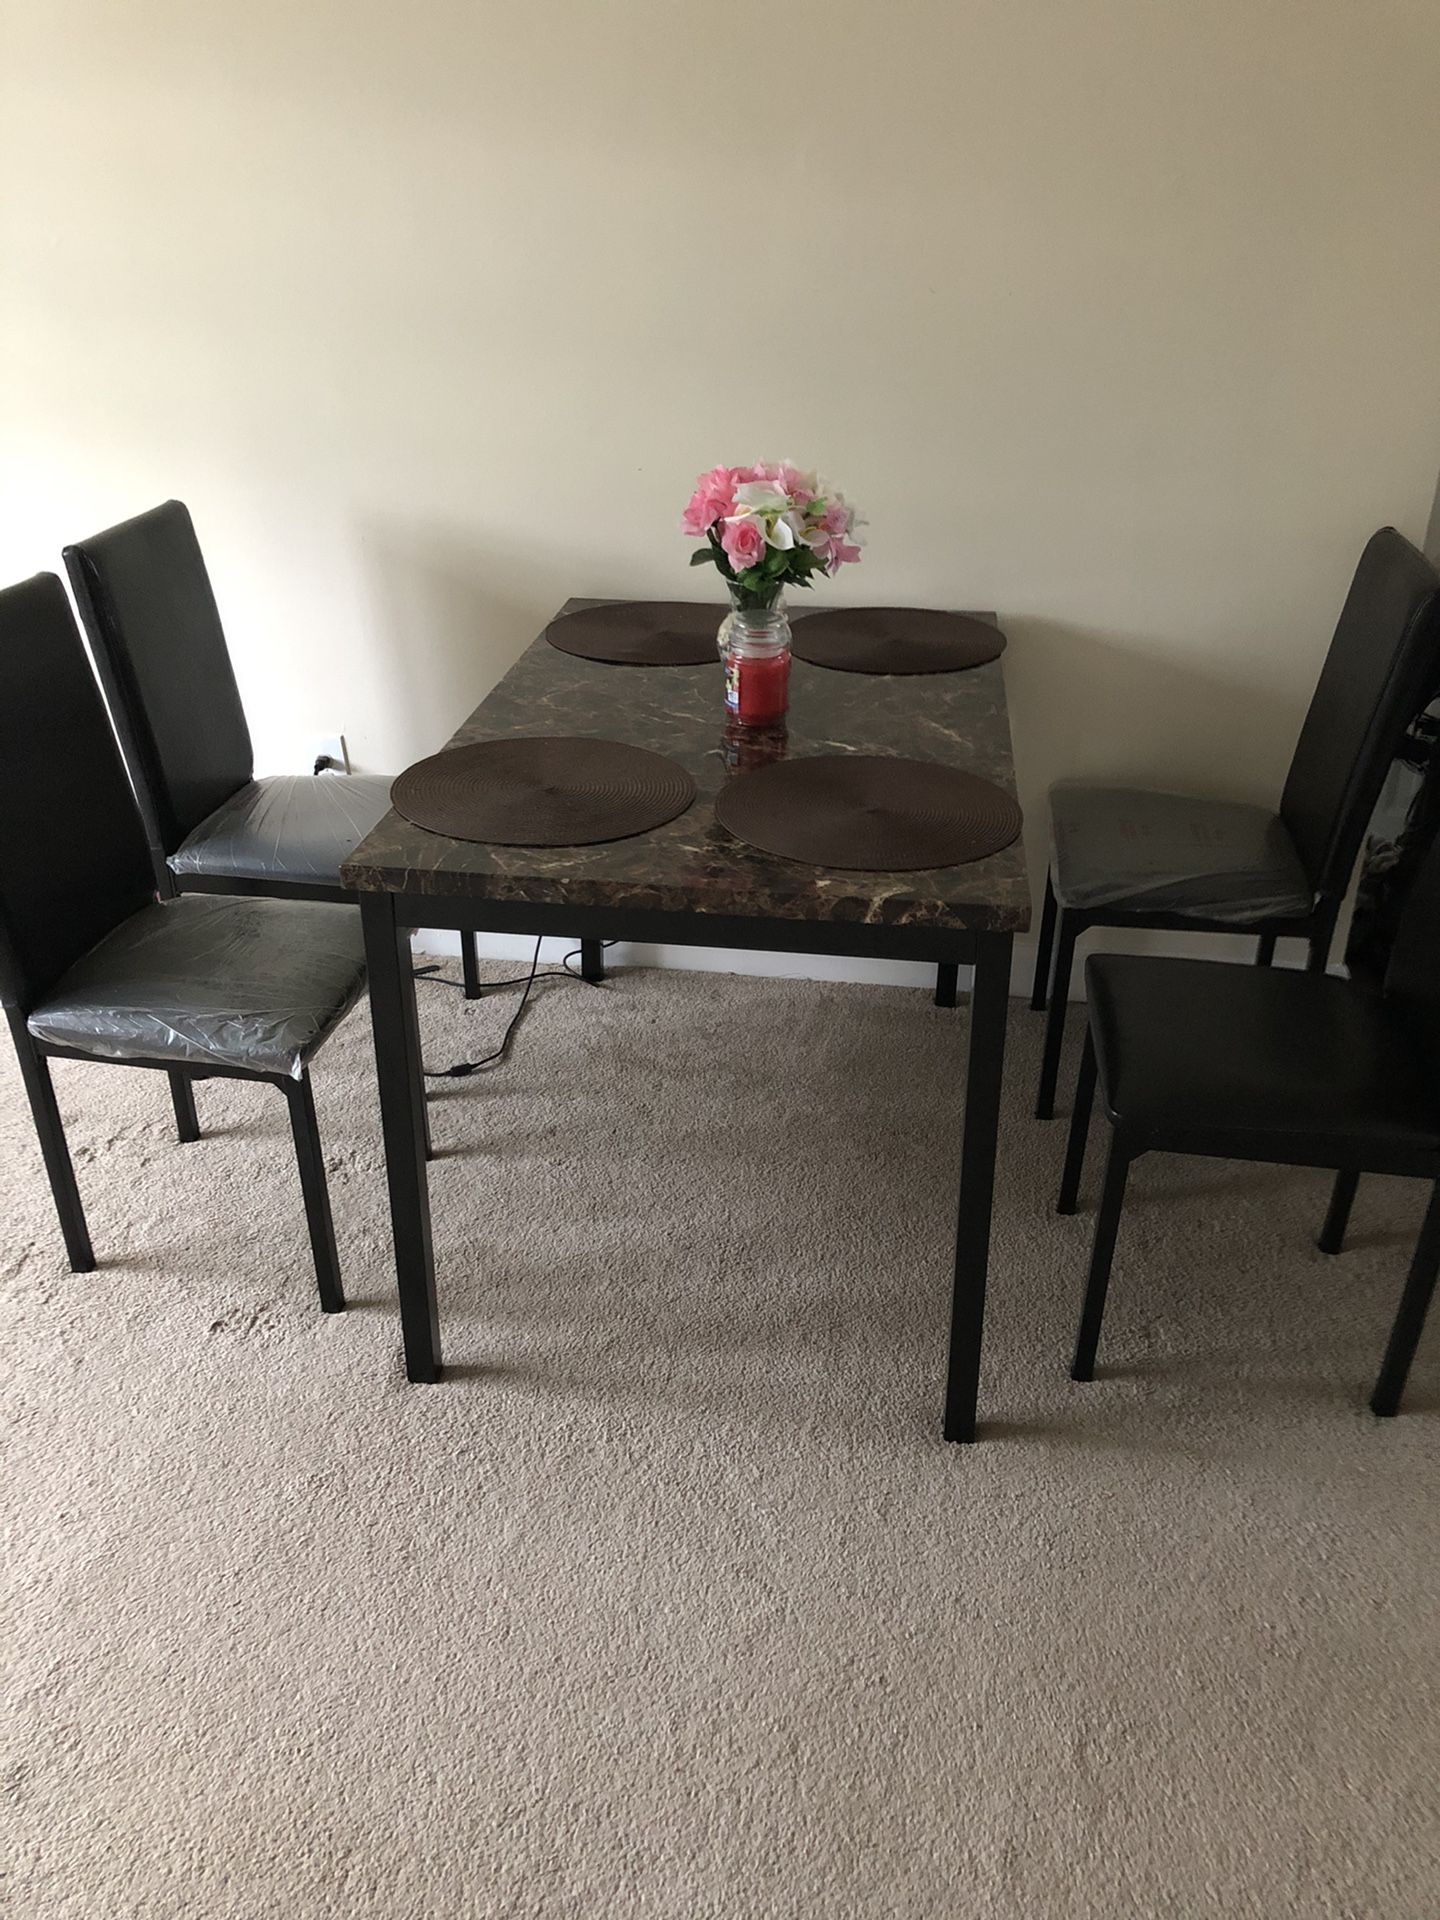 Dinner table for sale price negotiable